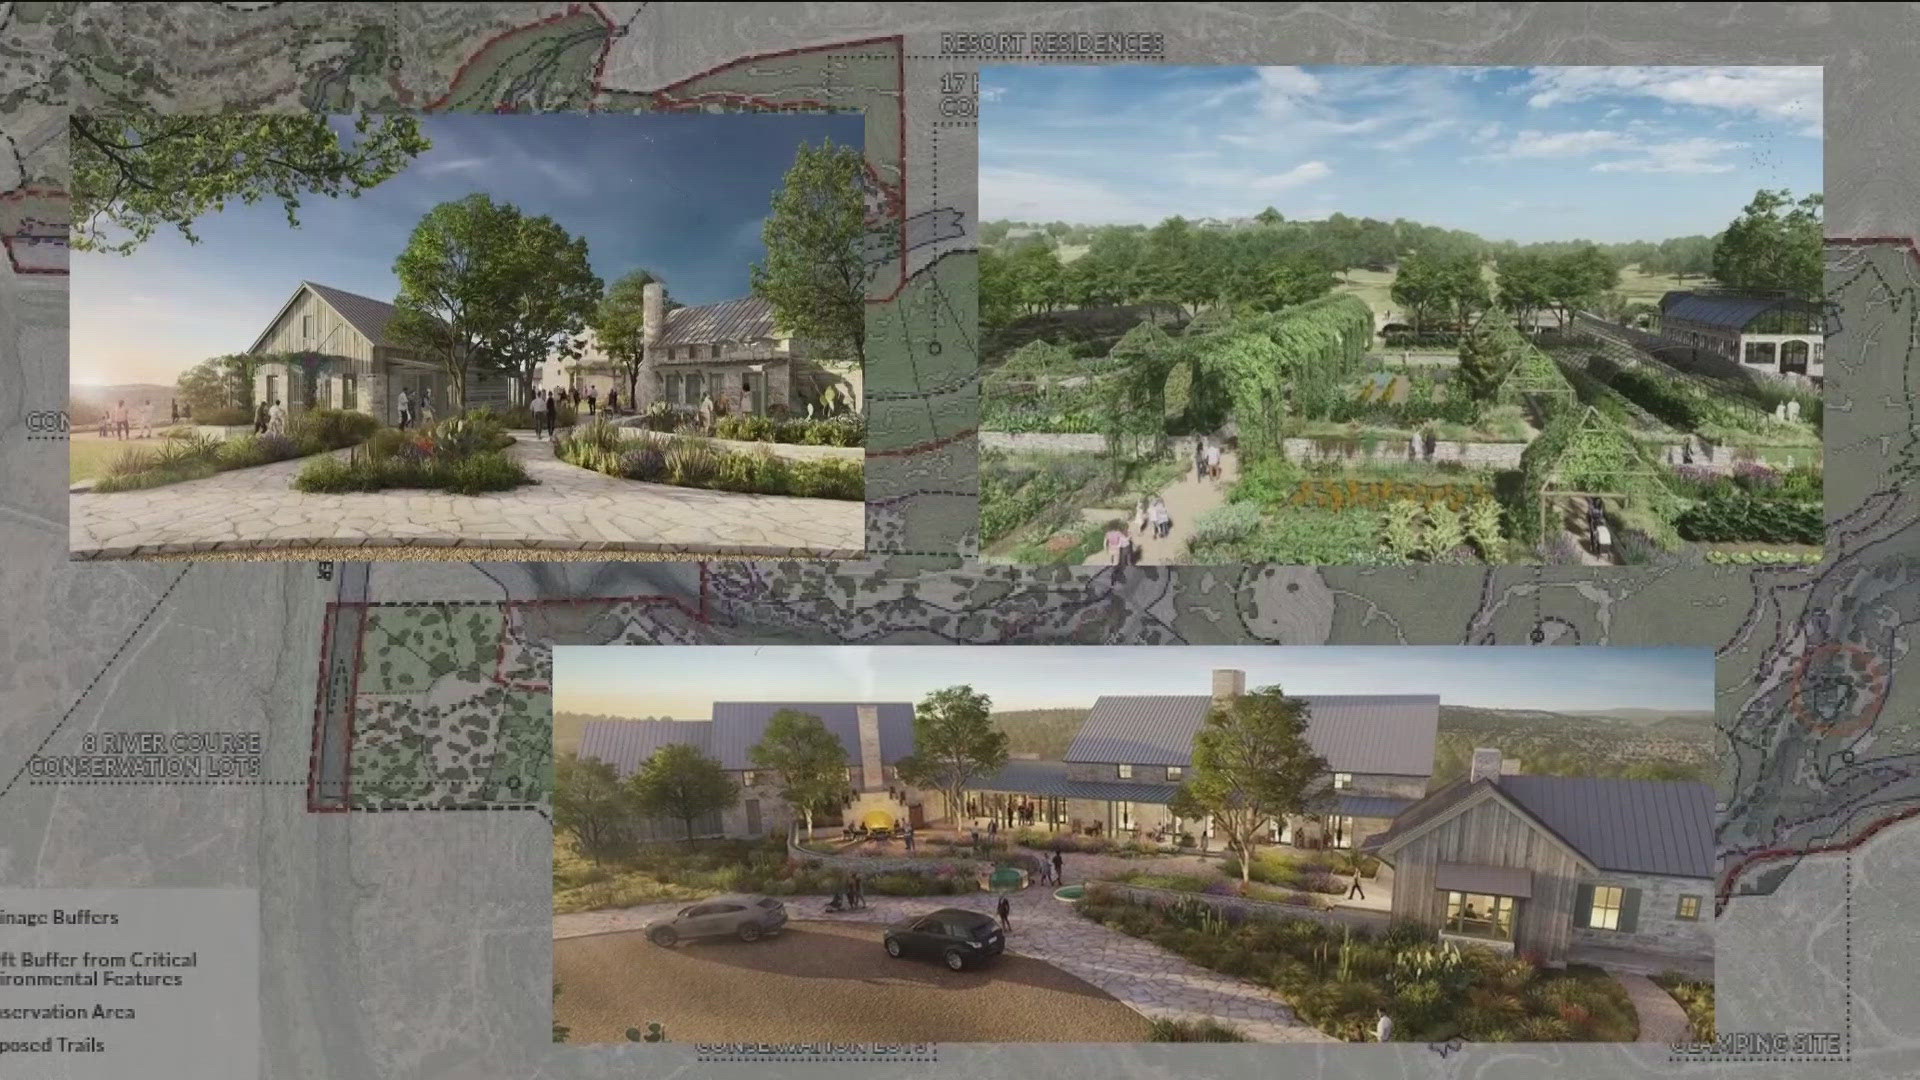 A plan for a new resort called Mirasol Springs is sparking backlash among neighbors west of Bee Cave. It's set to be built near Hamilton Pool.